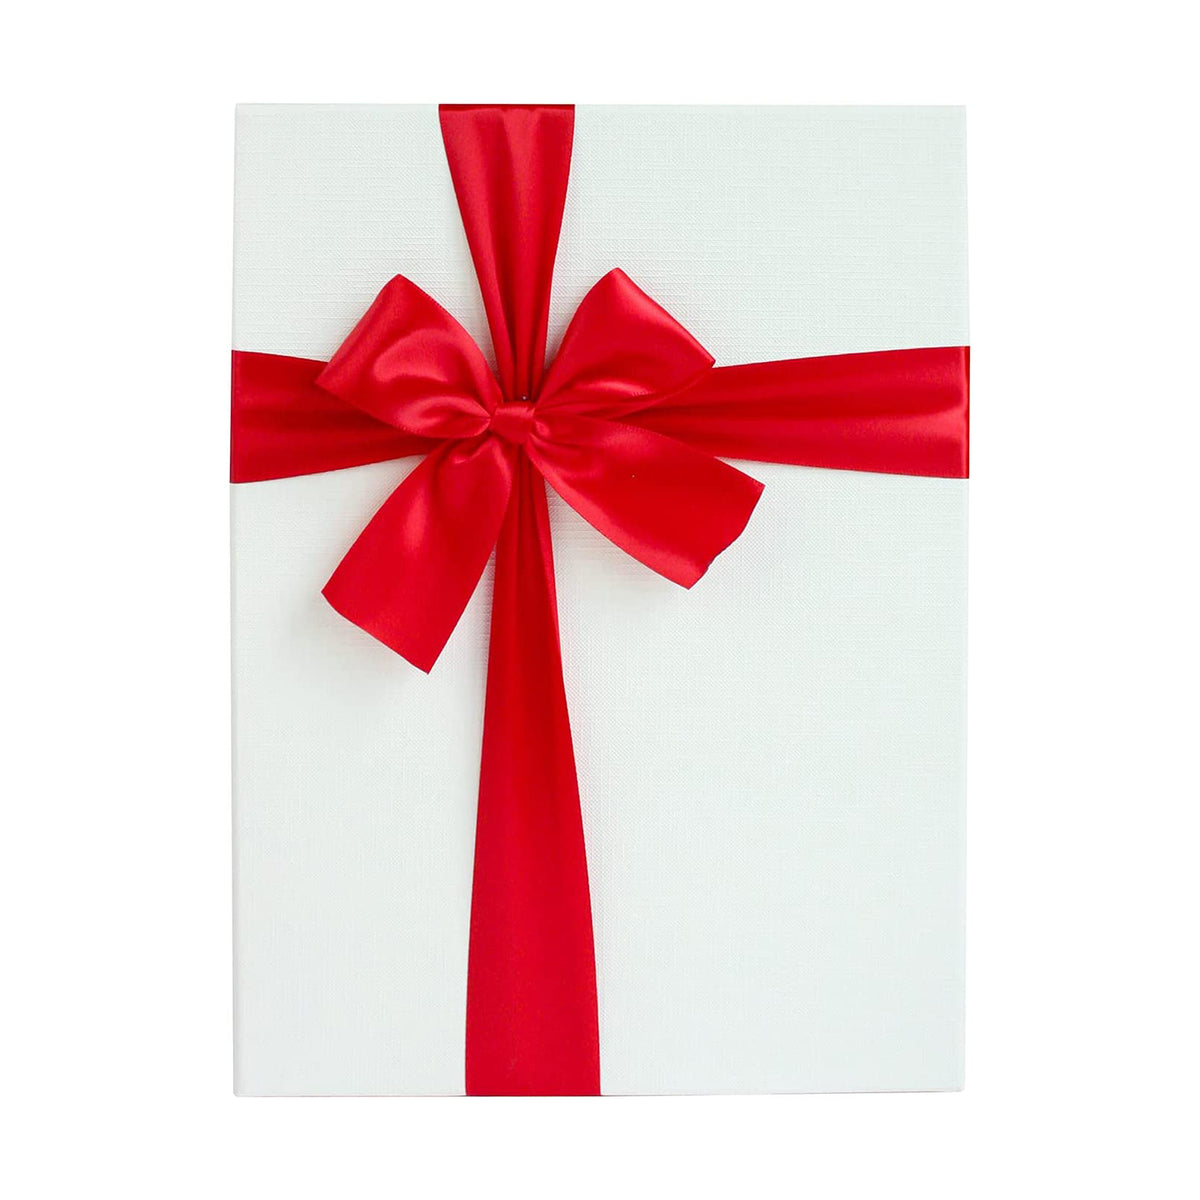 Close-up of decorative bow on red/white gift box